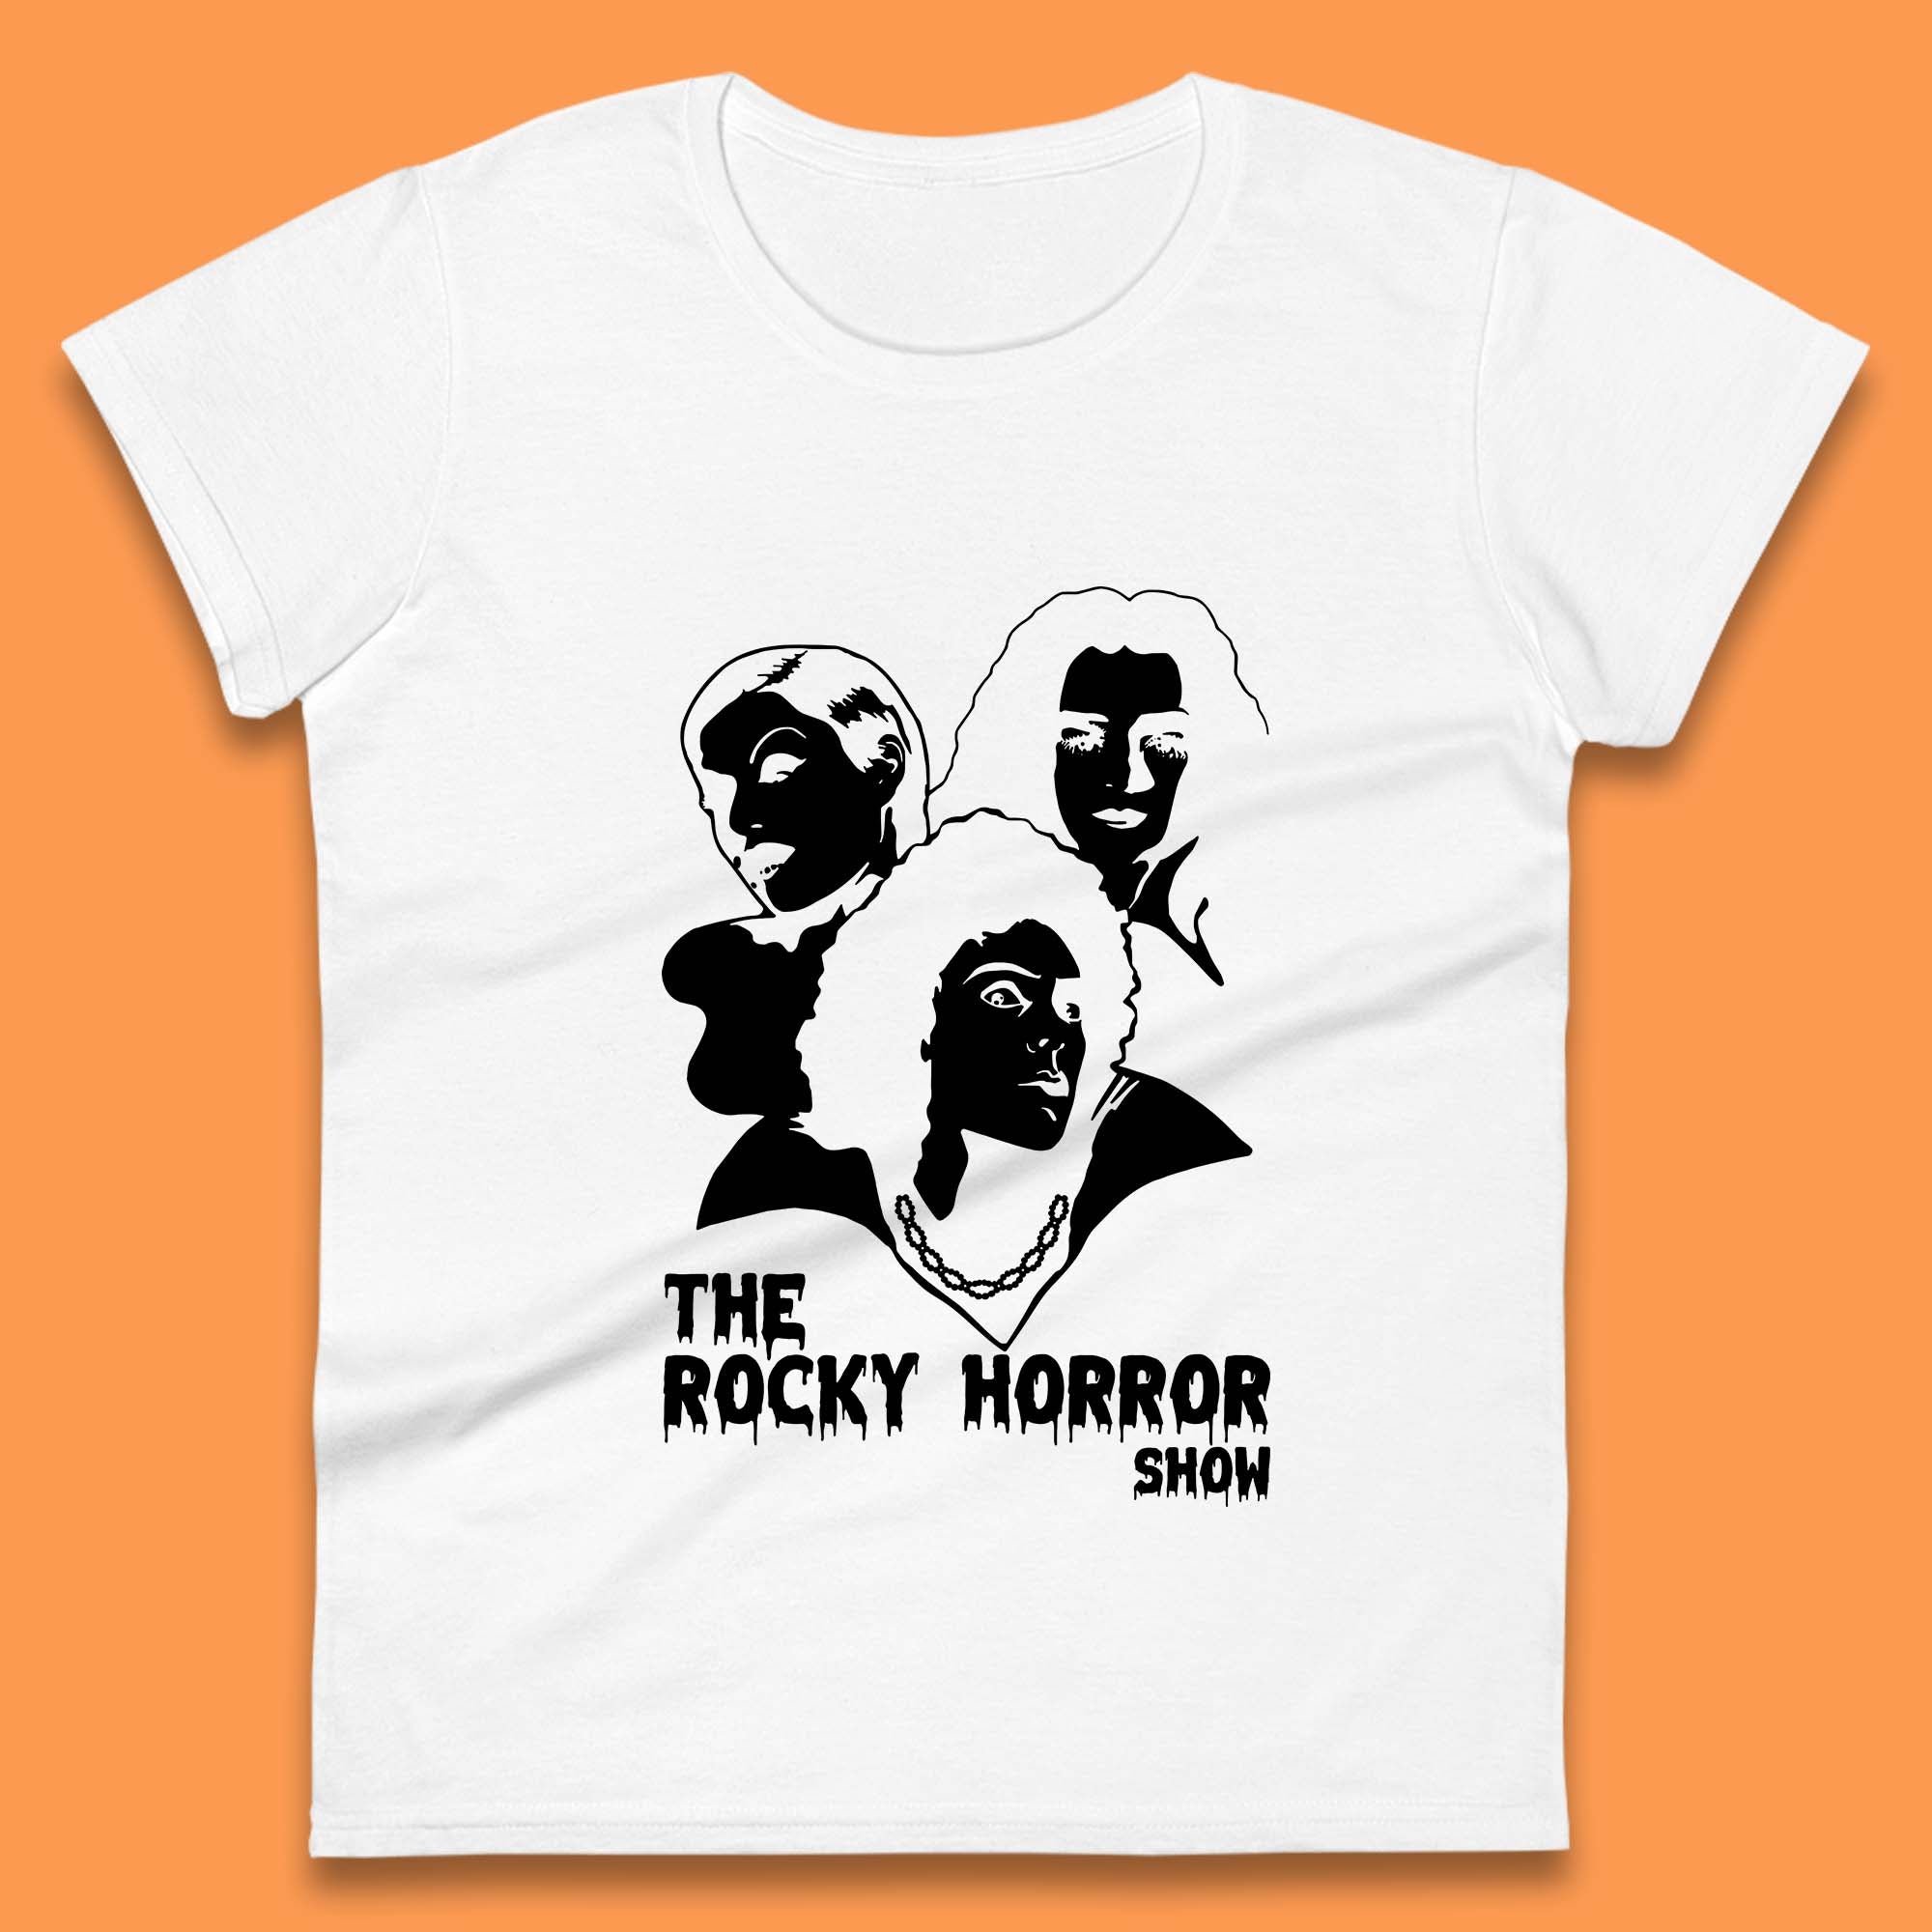 The Rocky Horror Show Halloween Horror Movie Frank N Furter Horror Picture Show Womens Tee Top